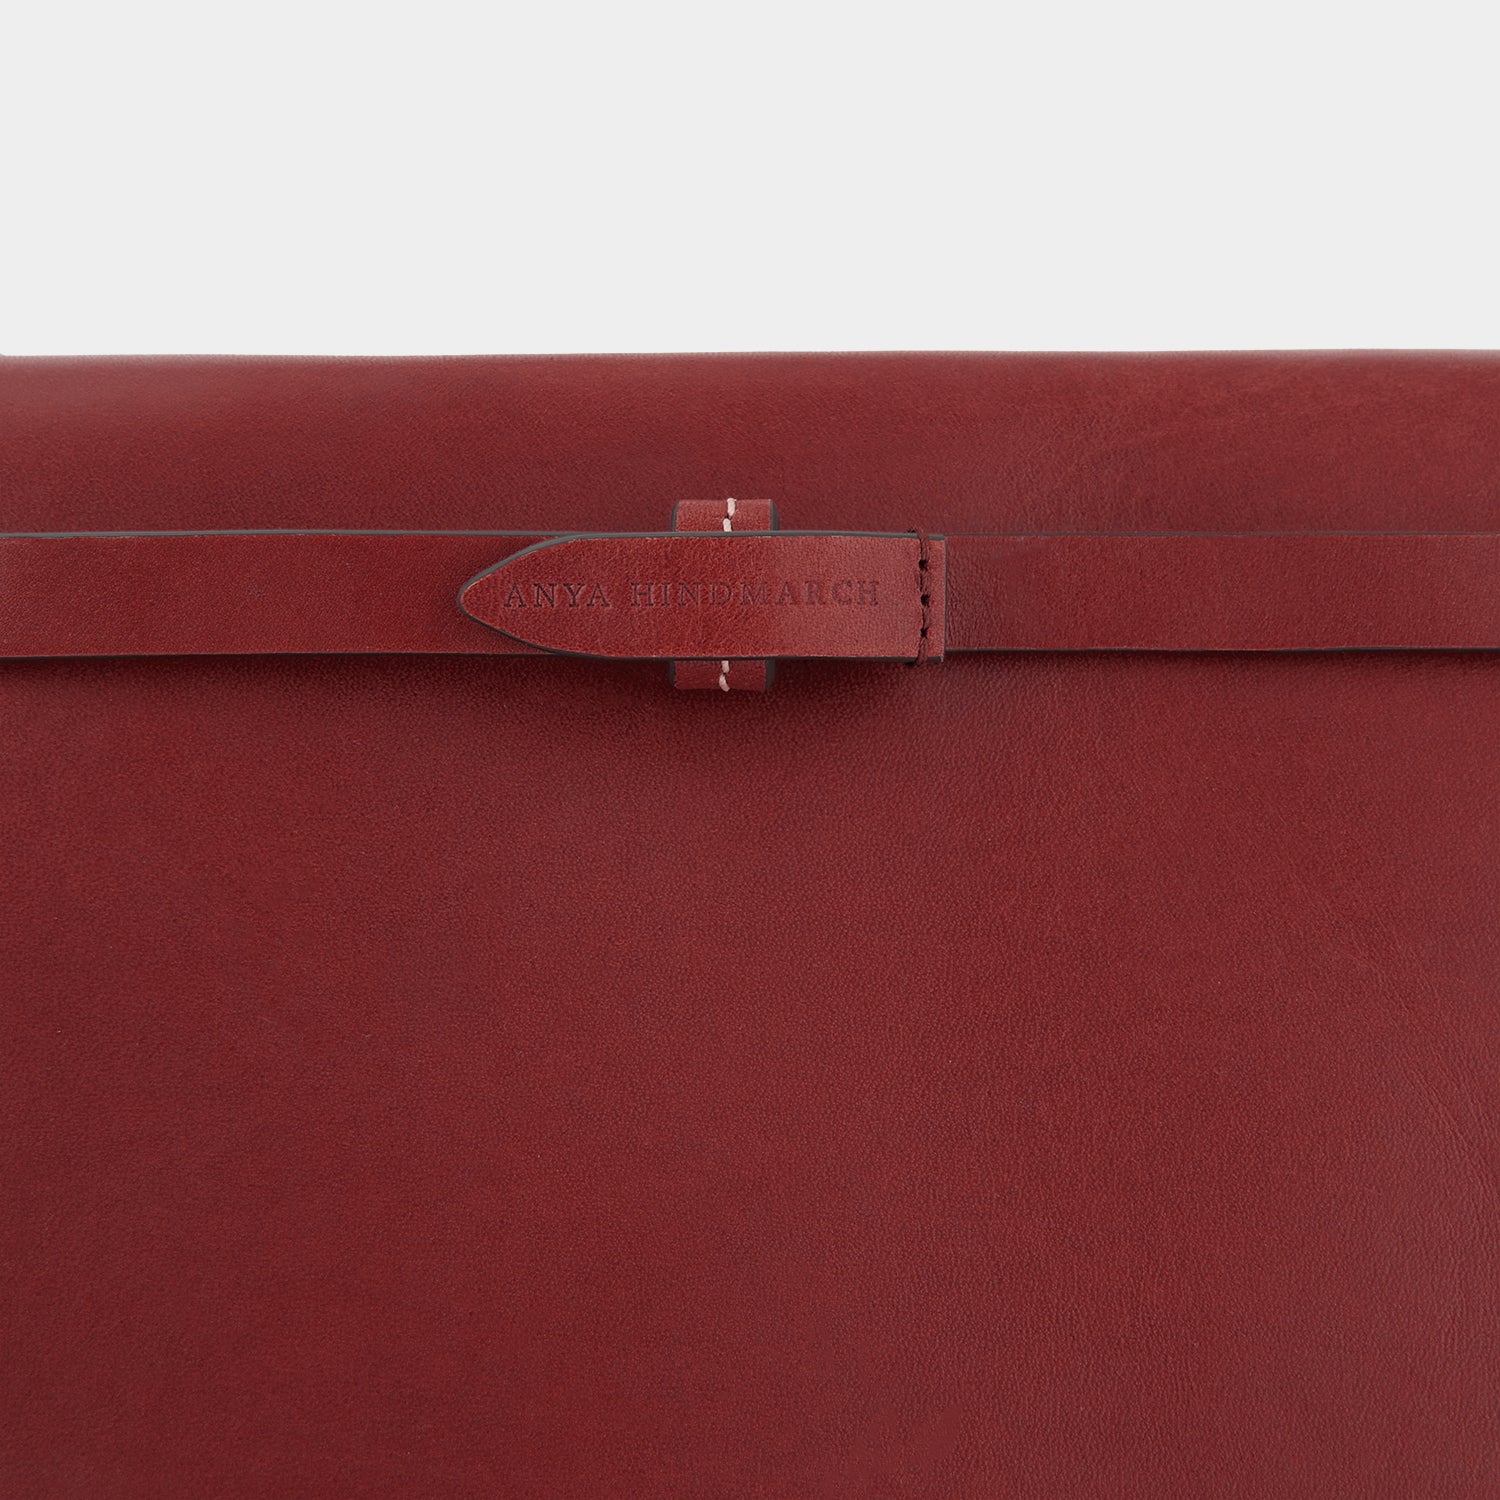 Return to Nature Cross-body -

                  
                    Compostable Leather in Rosewood -
                  

                  Anya Hindmarch UK
